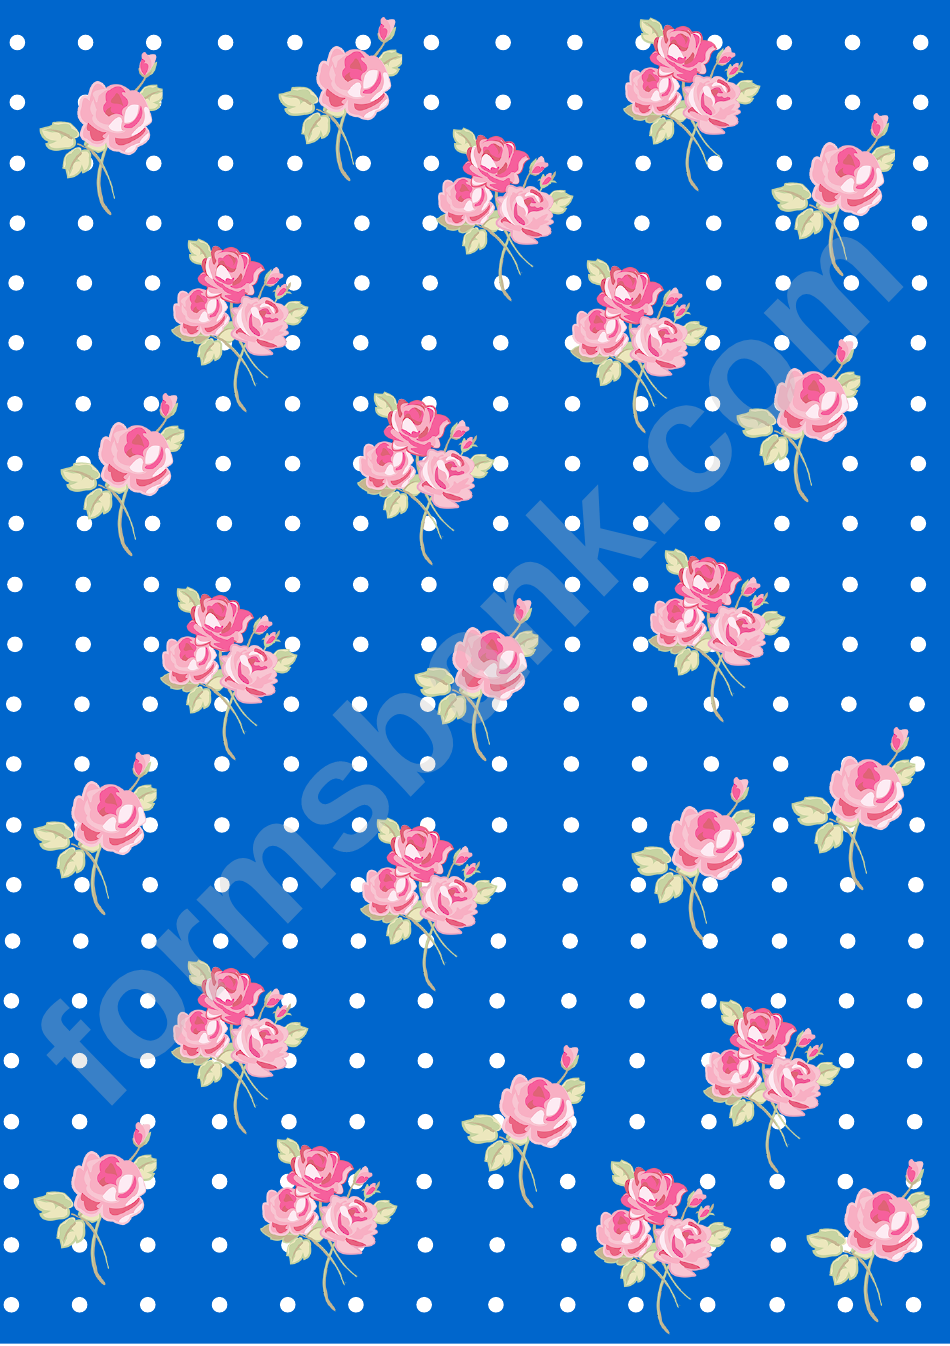 Flowers On Blue Dotted Background Template